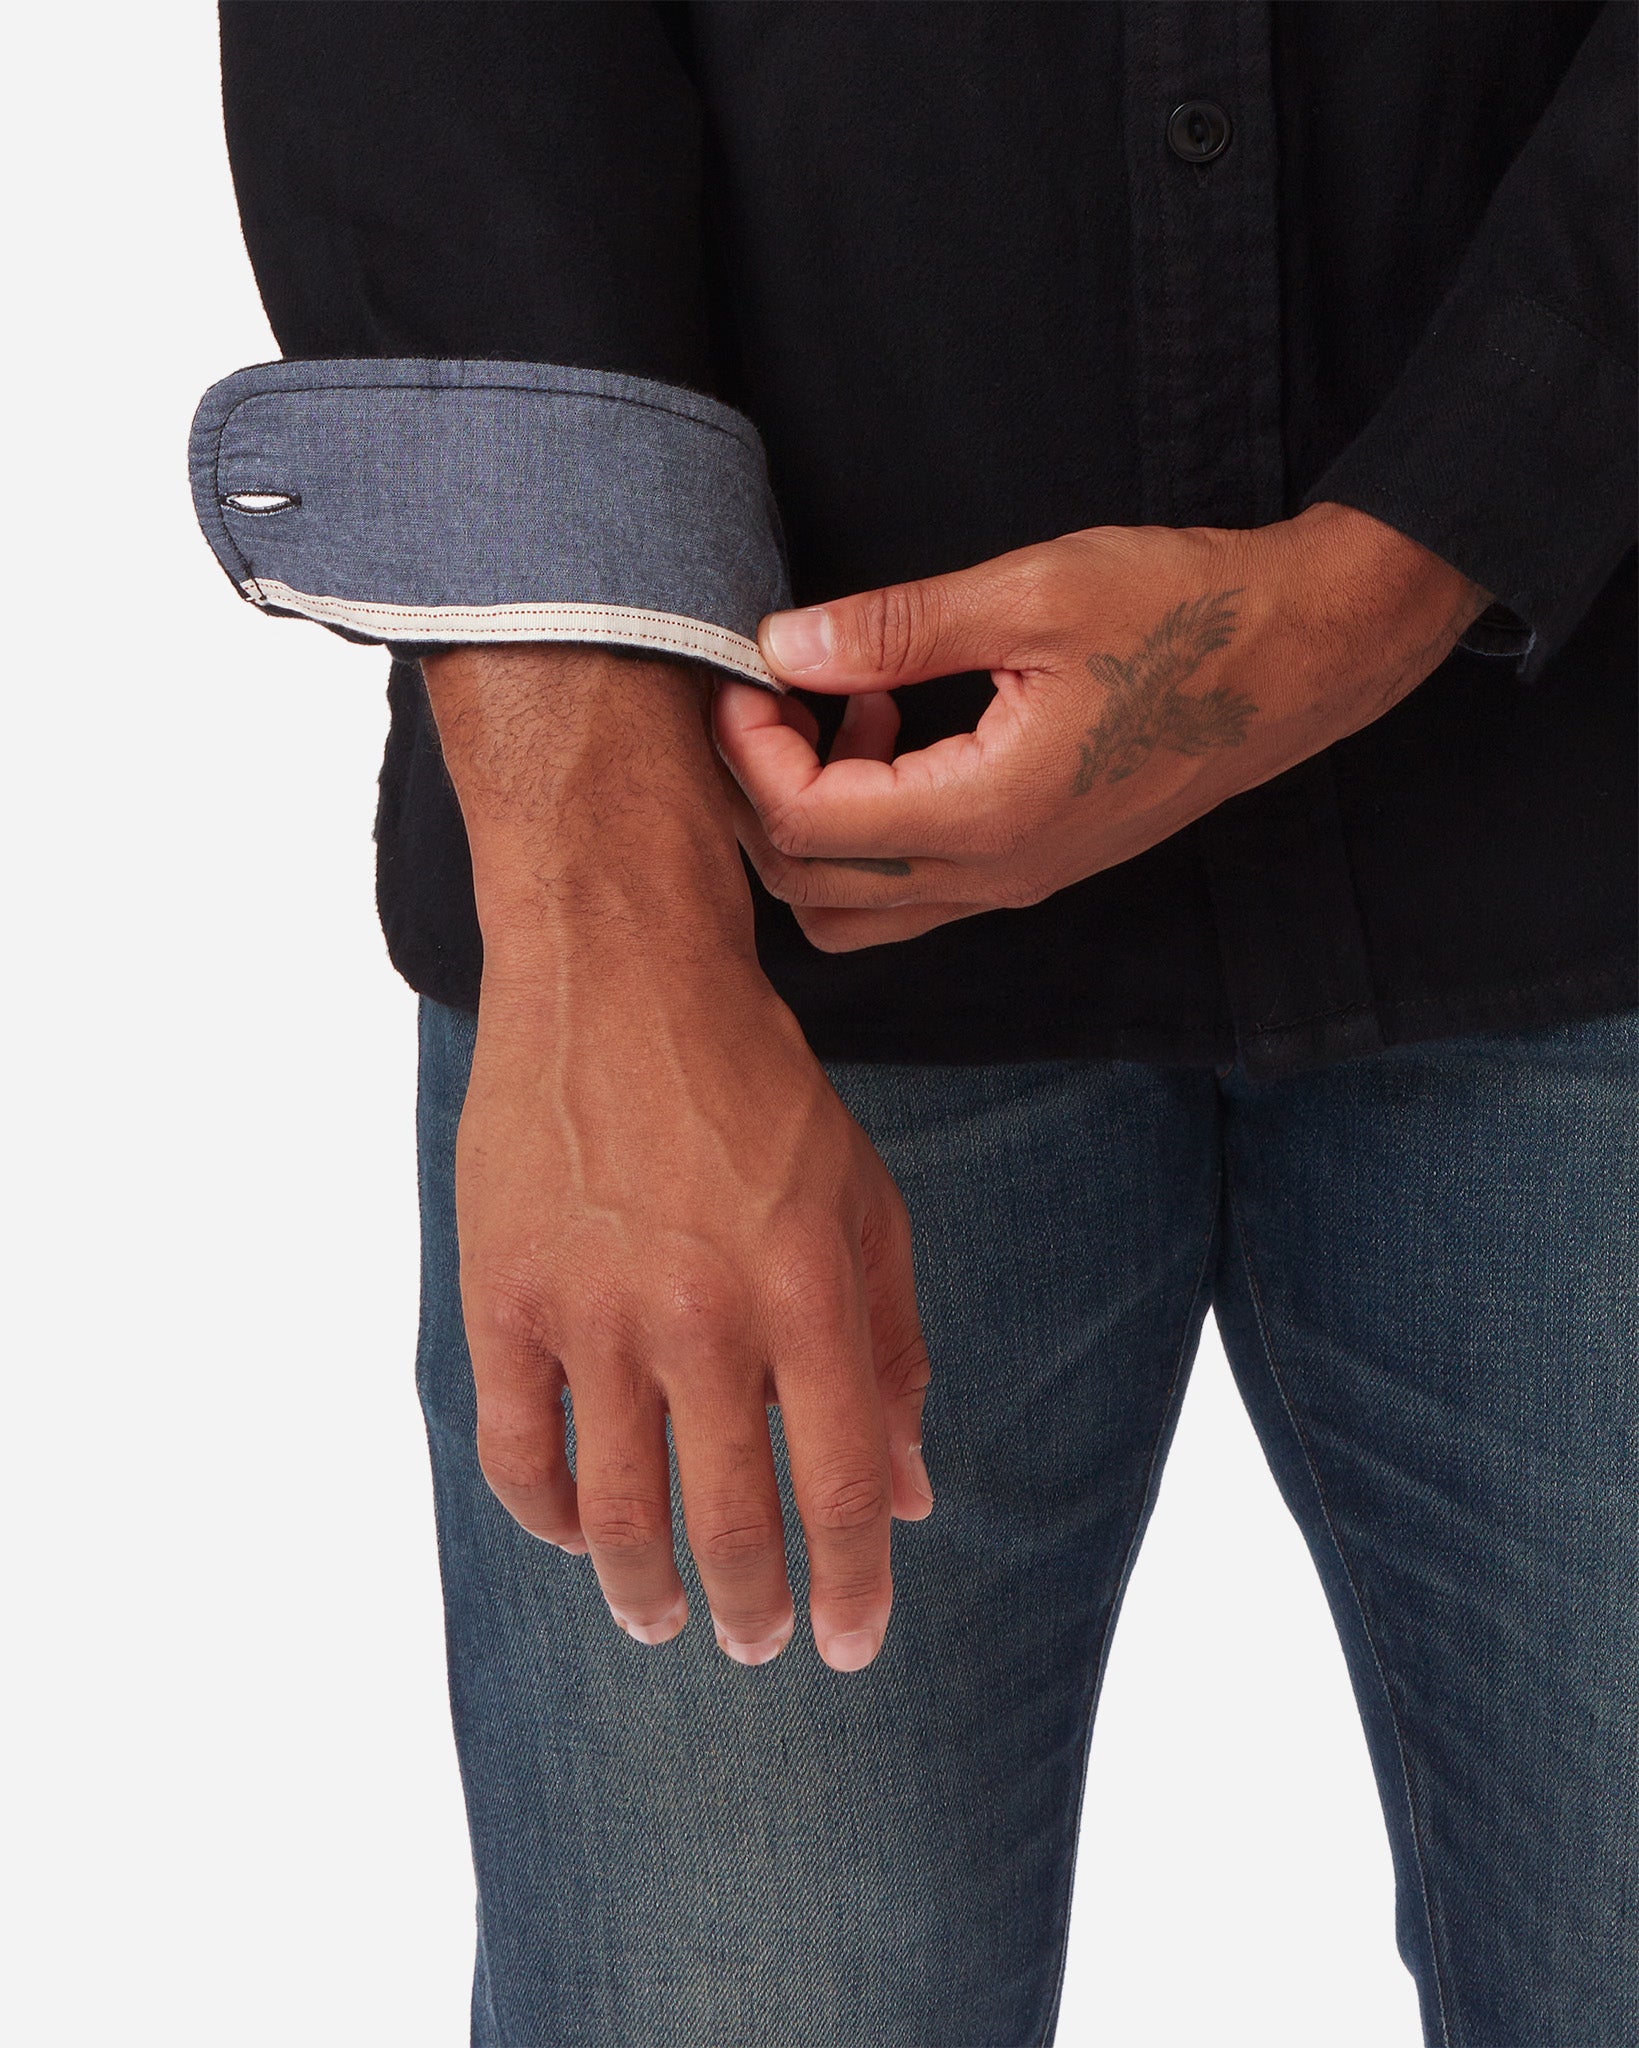 Interior right sleeve and left hand of model wearing Ace Rivington men's black soft brushed flannel shirt with color matched buttons and breast pockets and dirty vintage blue denim jeans with slight stylistic thigh wear